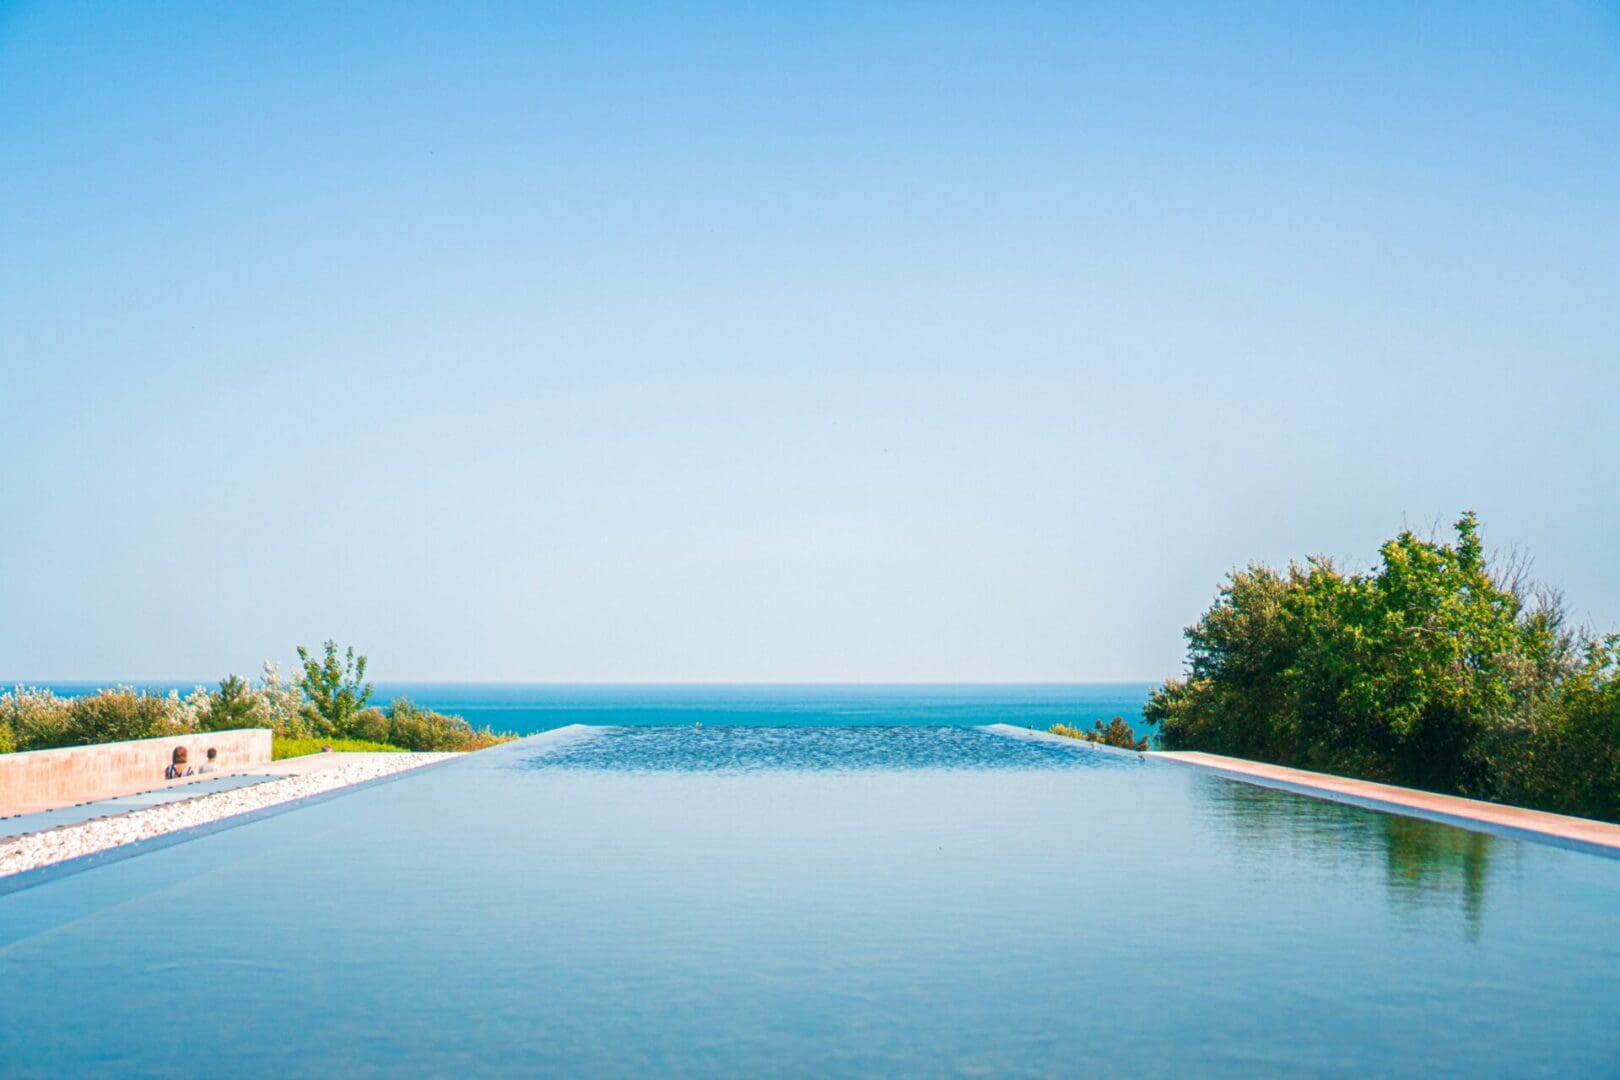 A pool with an ocean view and trees in the background.